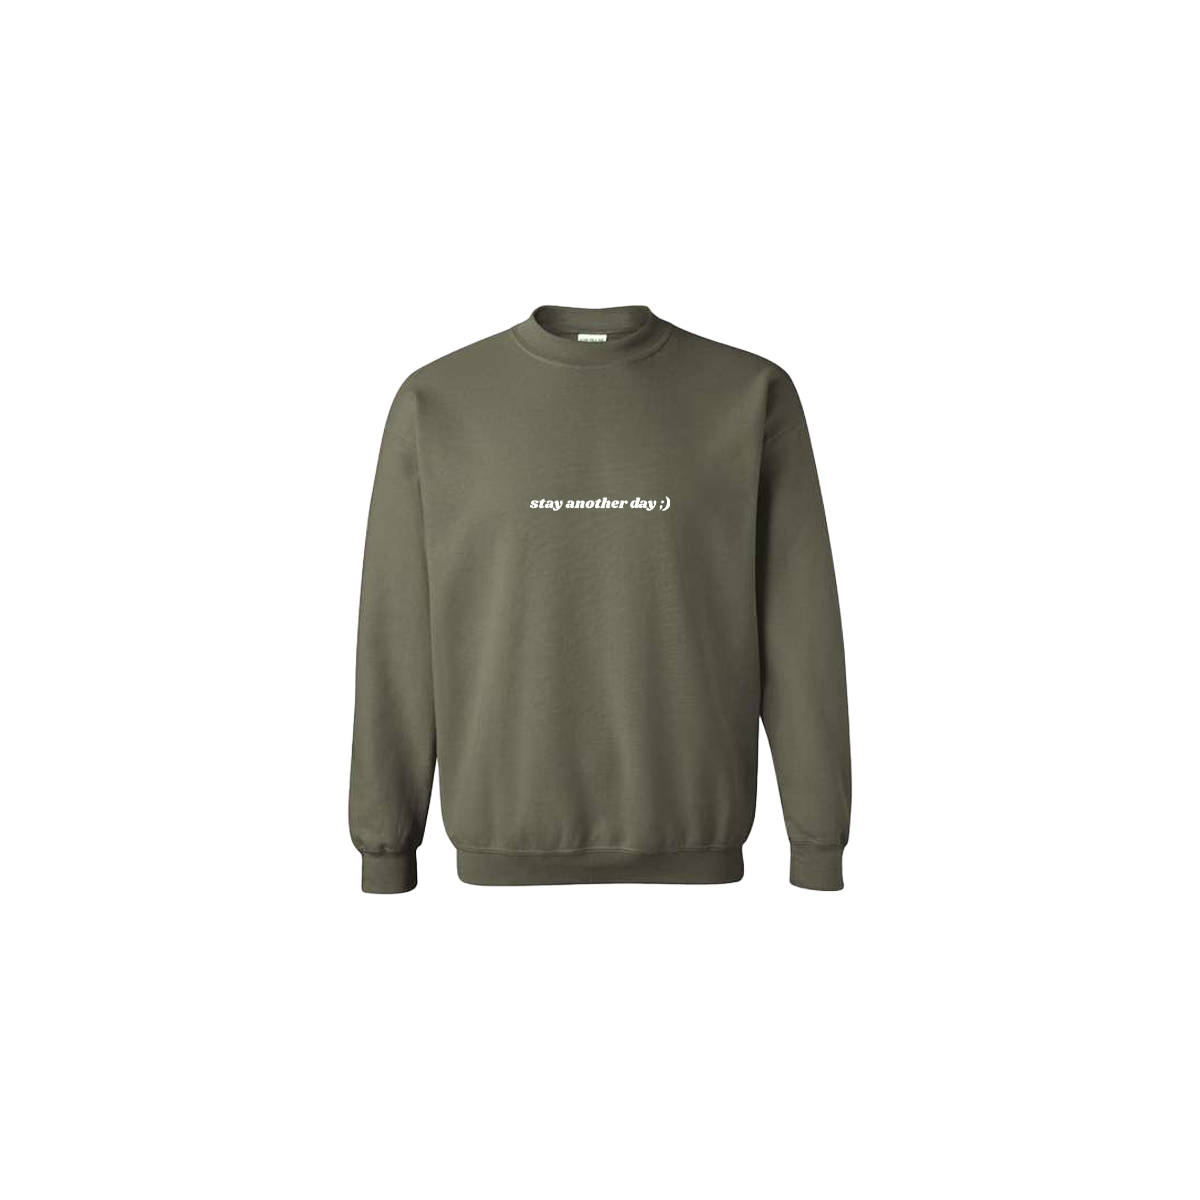 Stay Another Day Embroidered ArmyGreen Crewneck - Mental Health Awareness Clothing